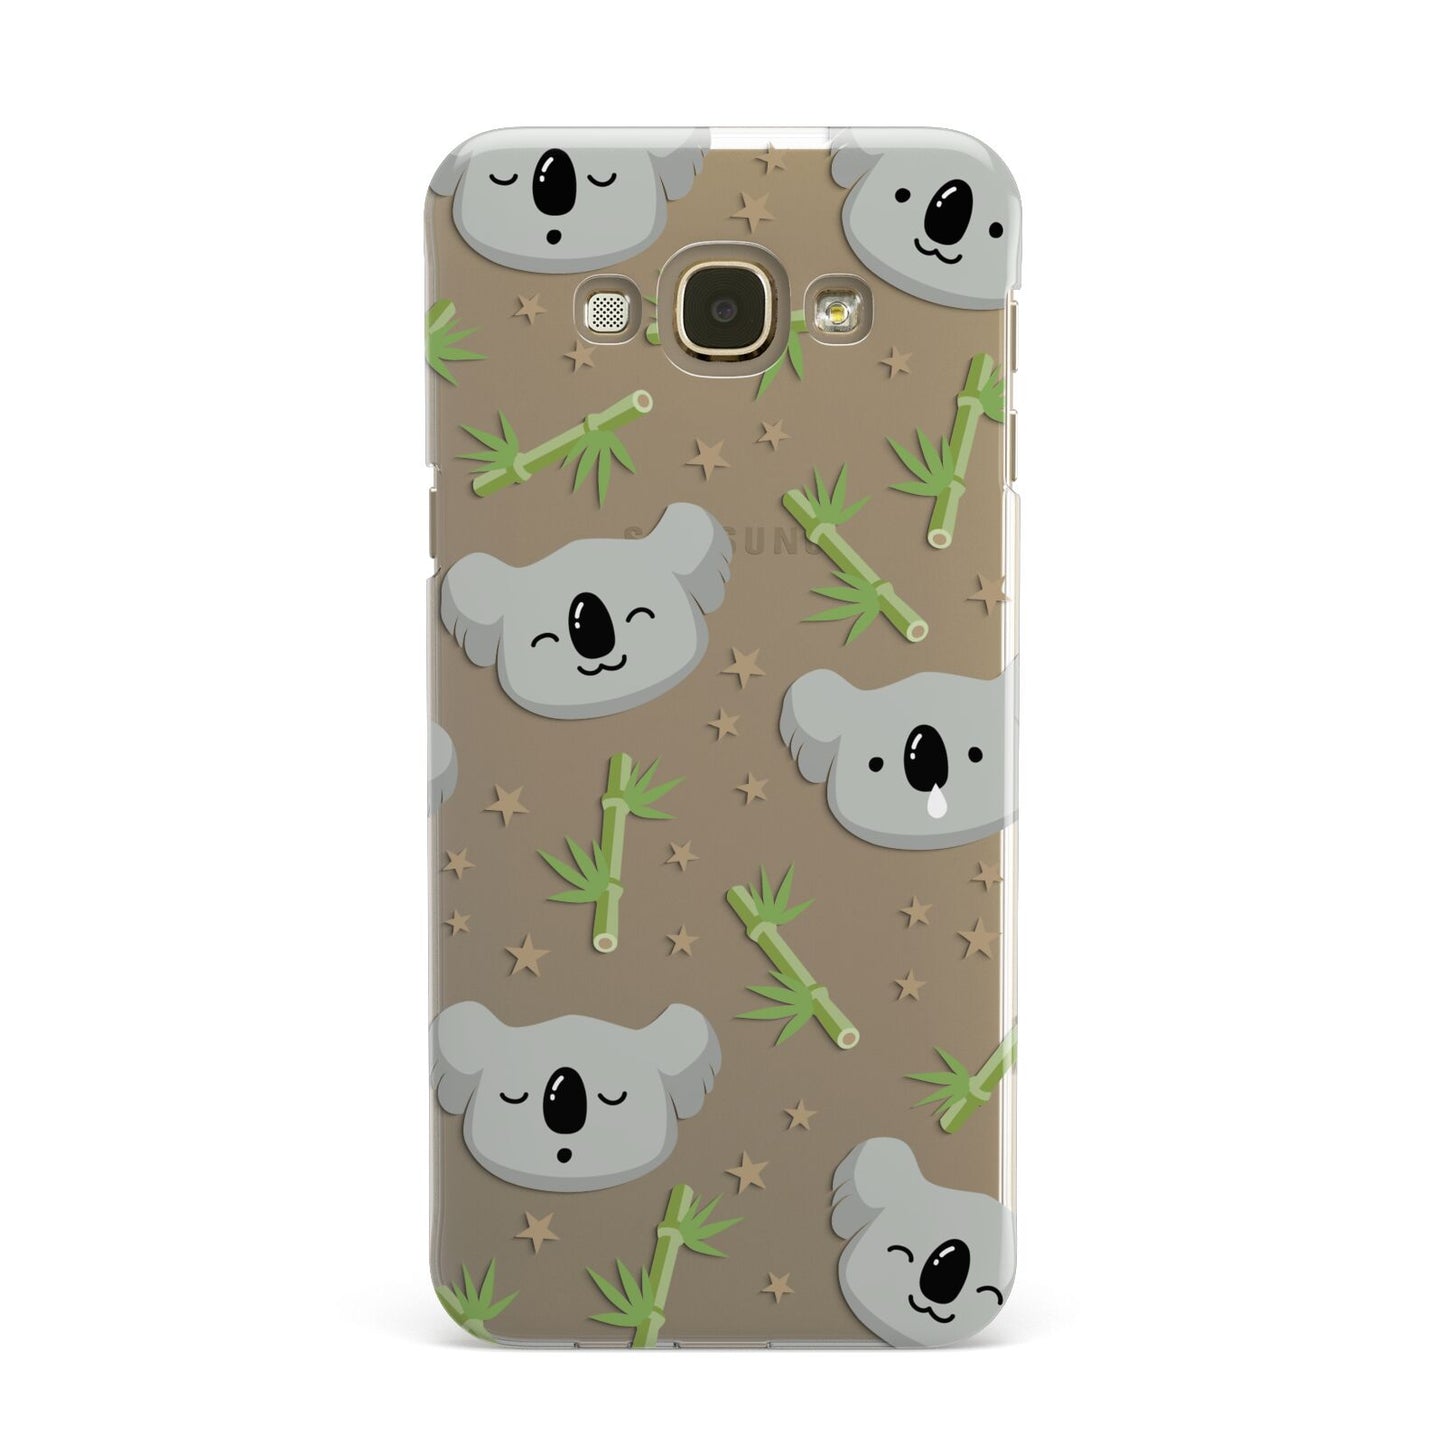 Koala Faces with Transparent Background Samsung Galaxy A8 Case